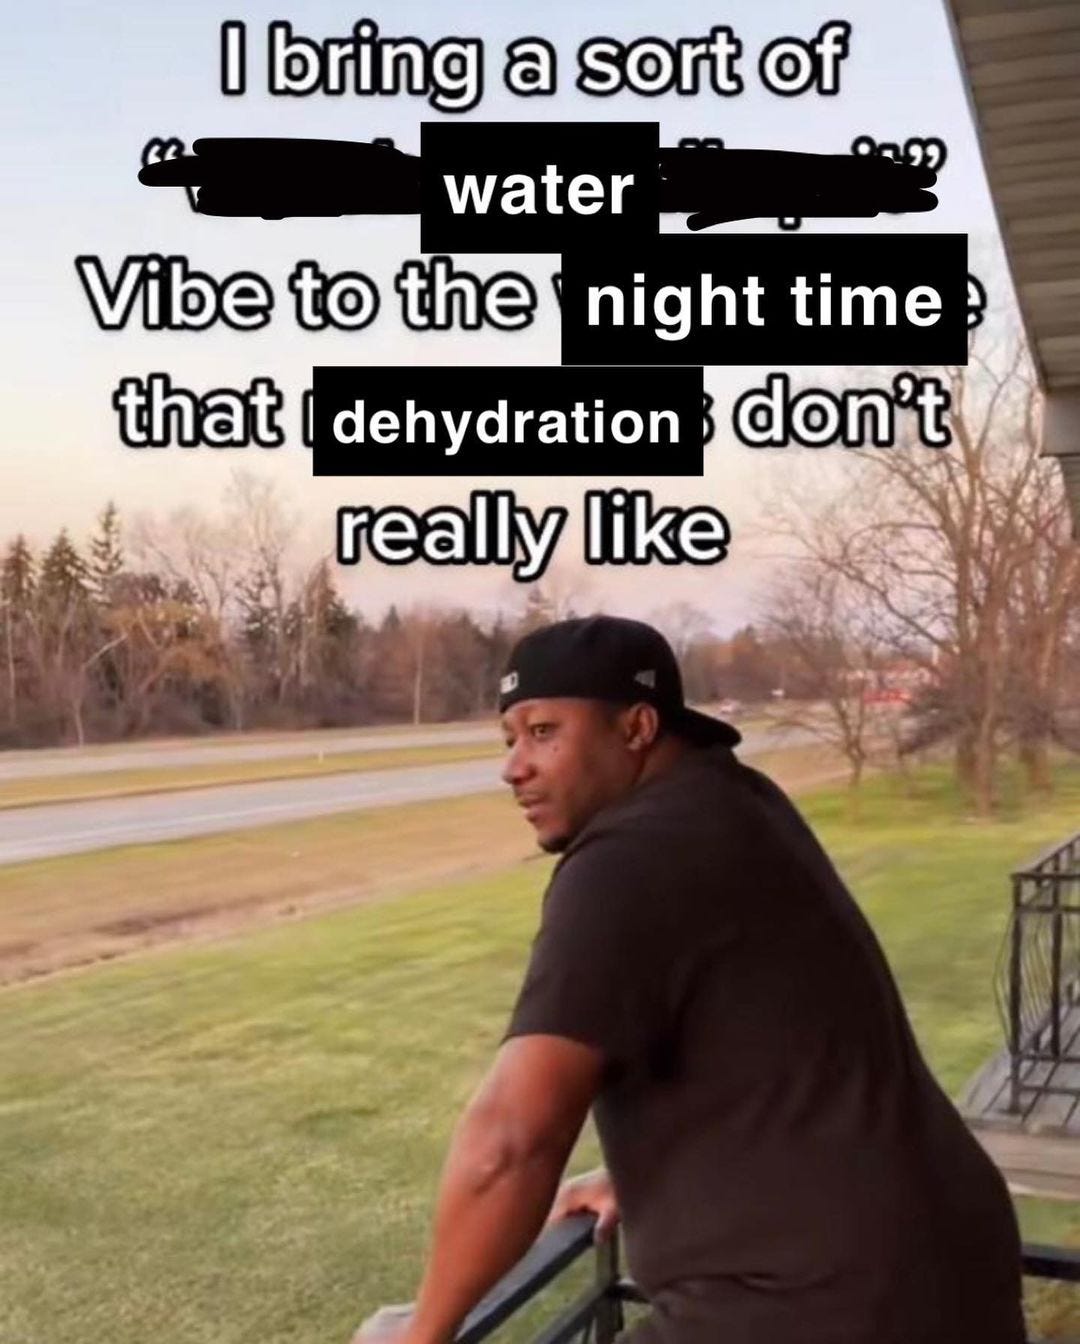 A meme showing a man who brings a water vibe to the night time that dehydration doesn't really like.